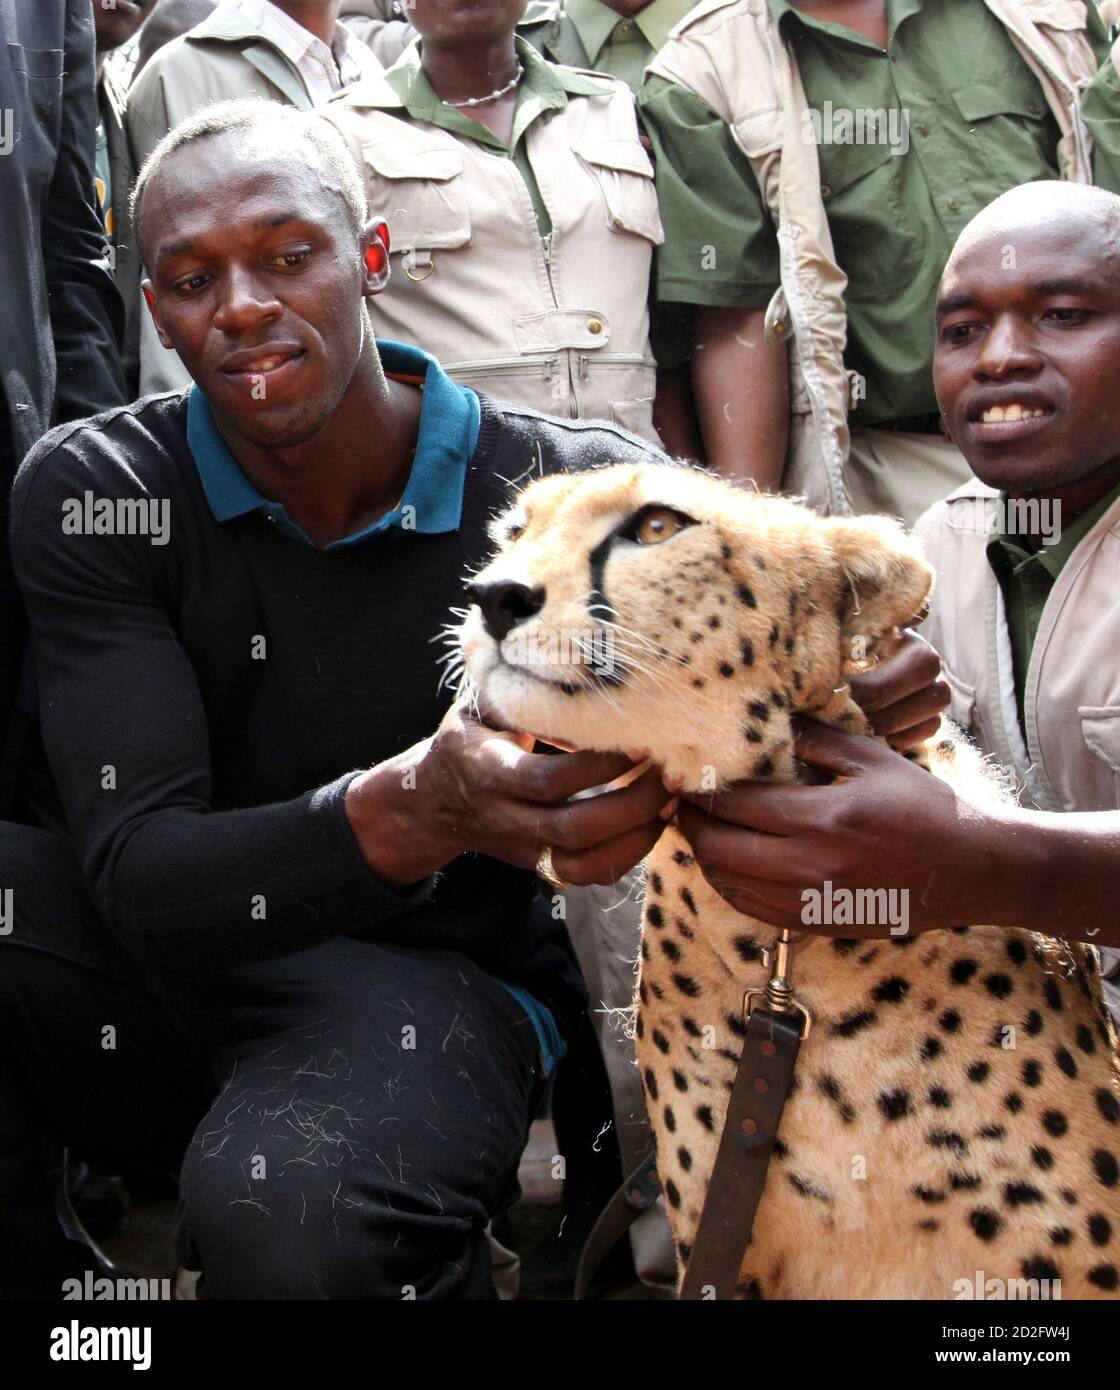 Olympic and world sprint champion Usain Bolt of Jamaica poses with a  cheetah at the Kenya Wildlife Service (KWS) headquarters in Kenya's capital  Nairobi November 2, 2009. Bolt adopted a three-month old